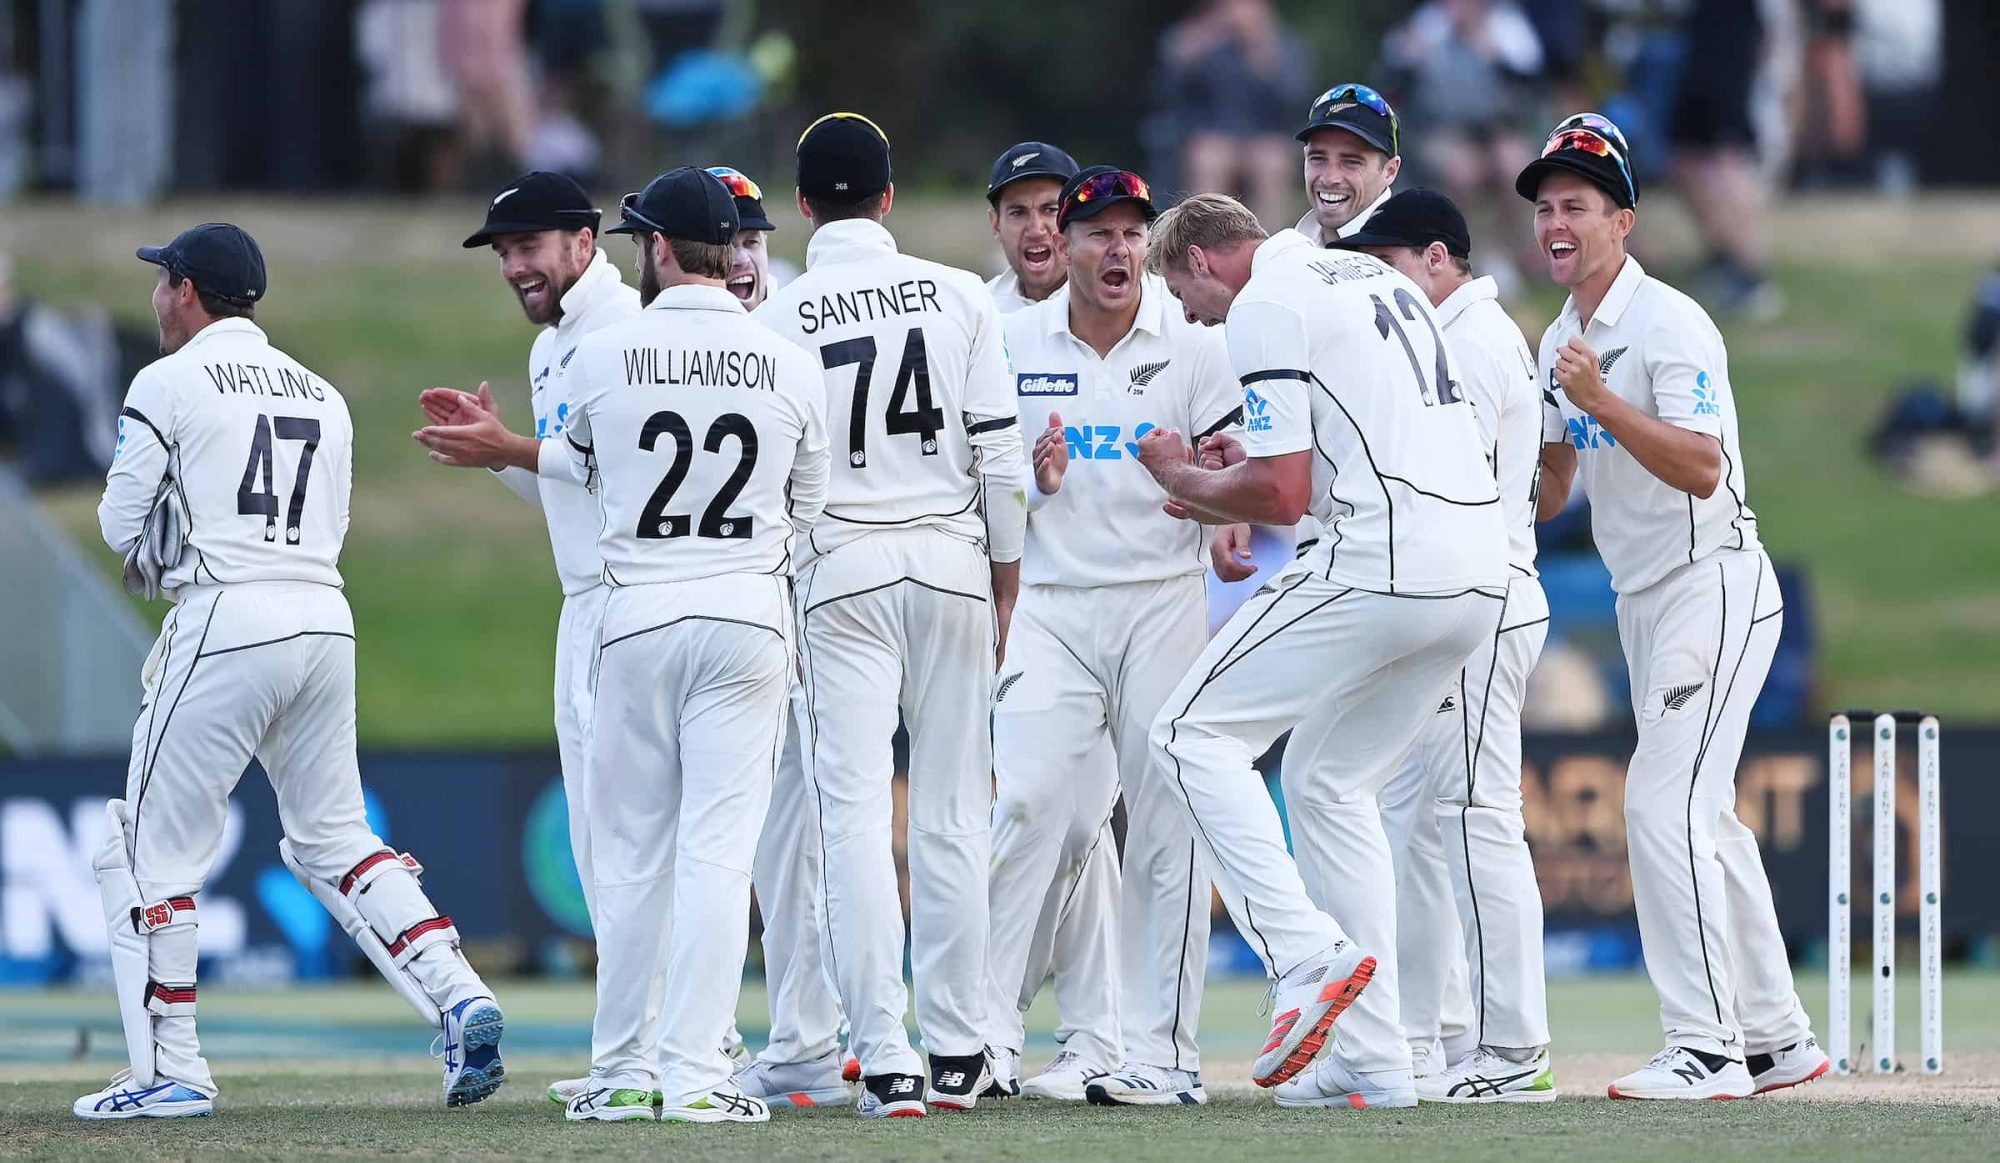 New Zealand Become Number 1 in ICC Test Rankings For First Time In Their History After Thrashing Pakistan